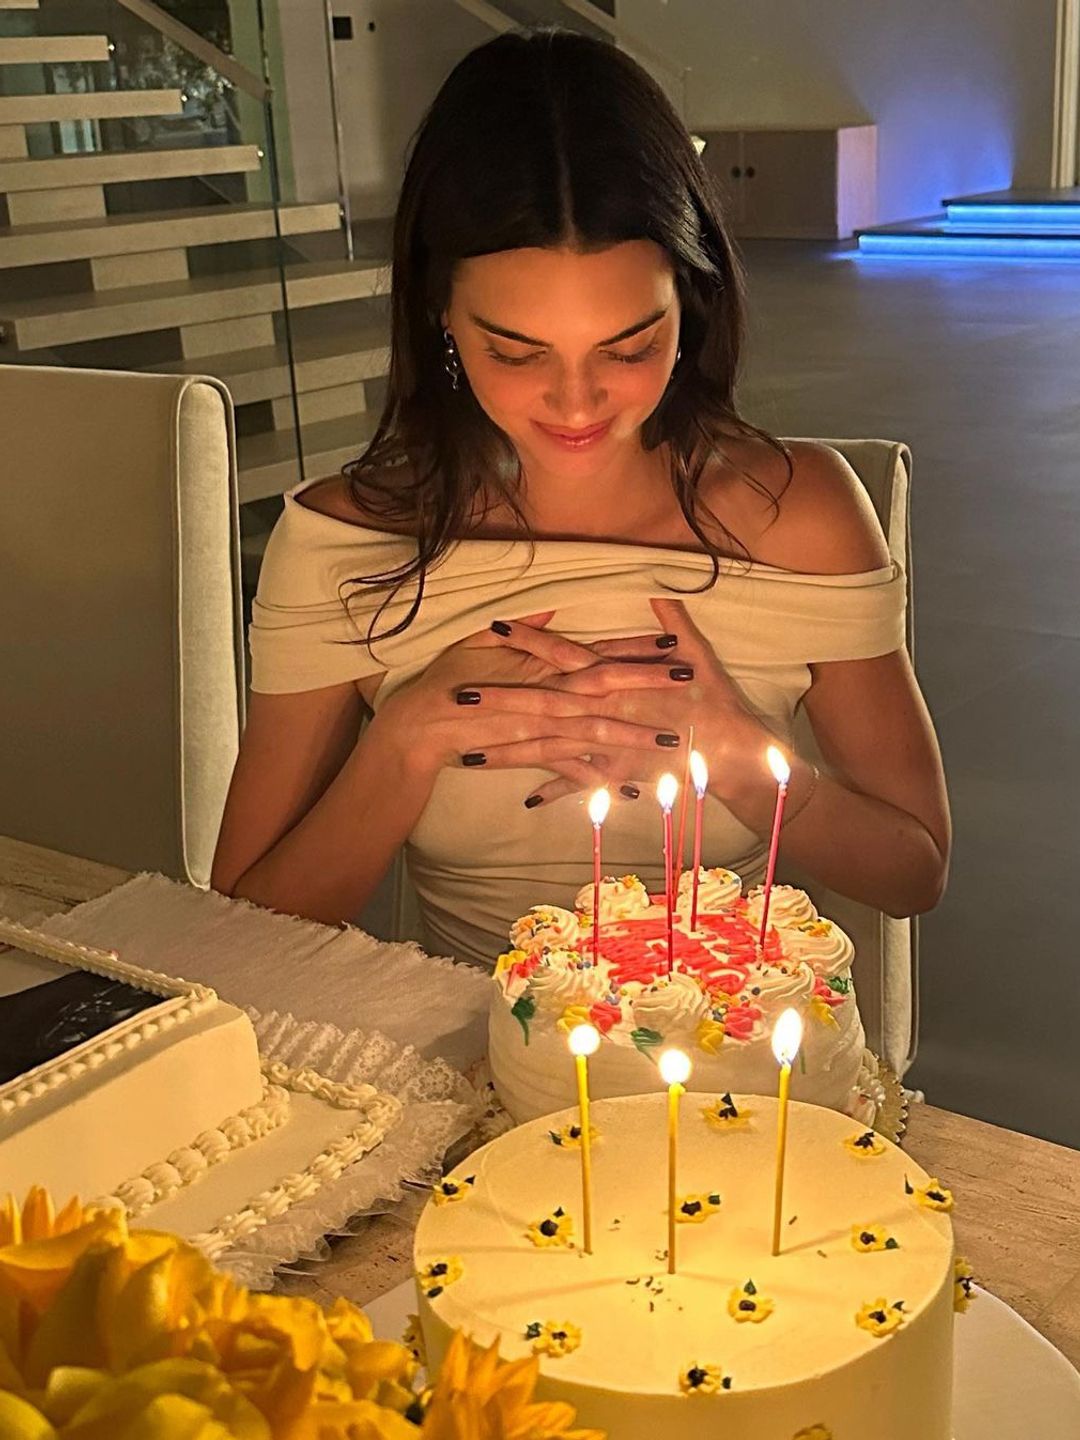 Kendall Jenner smiling over her birthday cake in a white off-the-shoulder dress